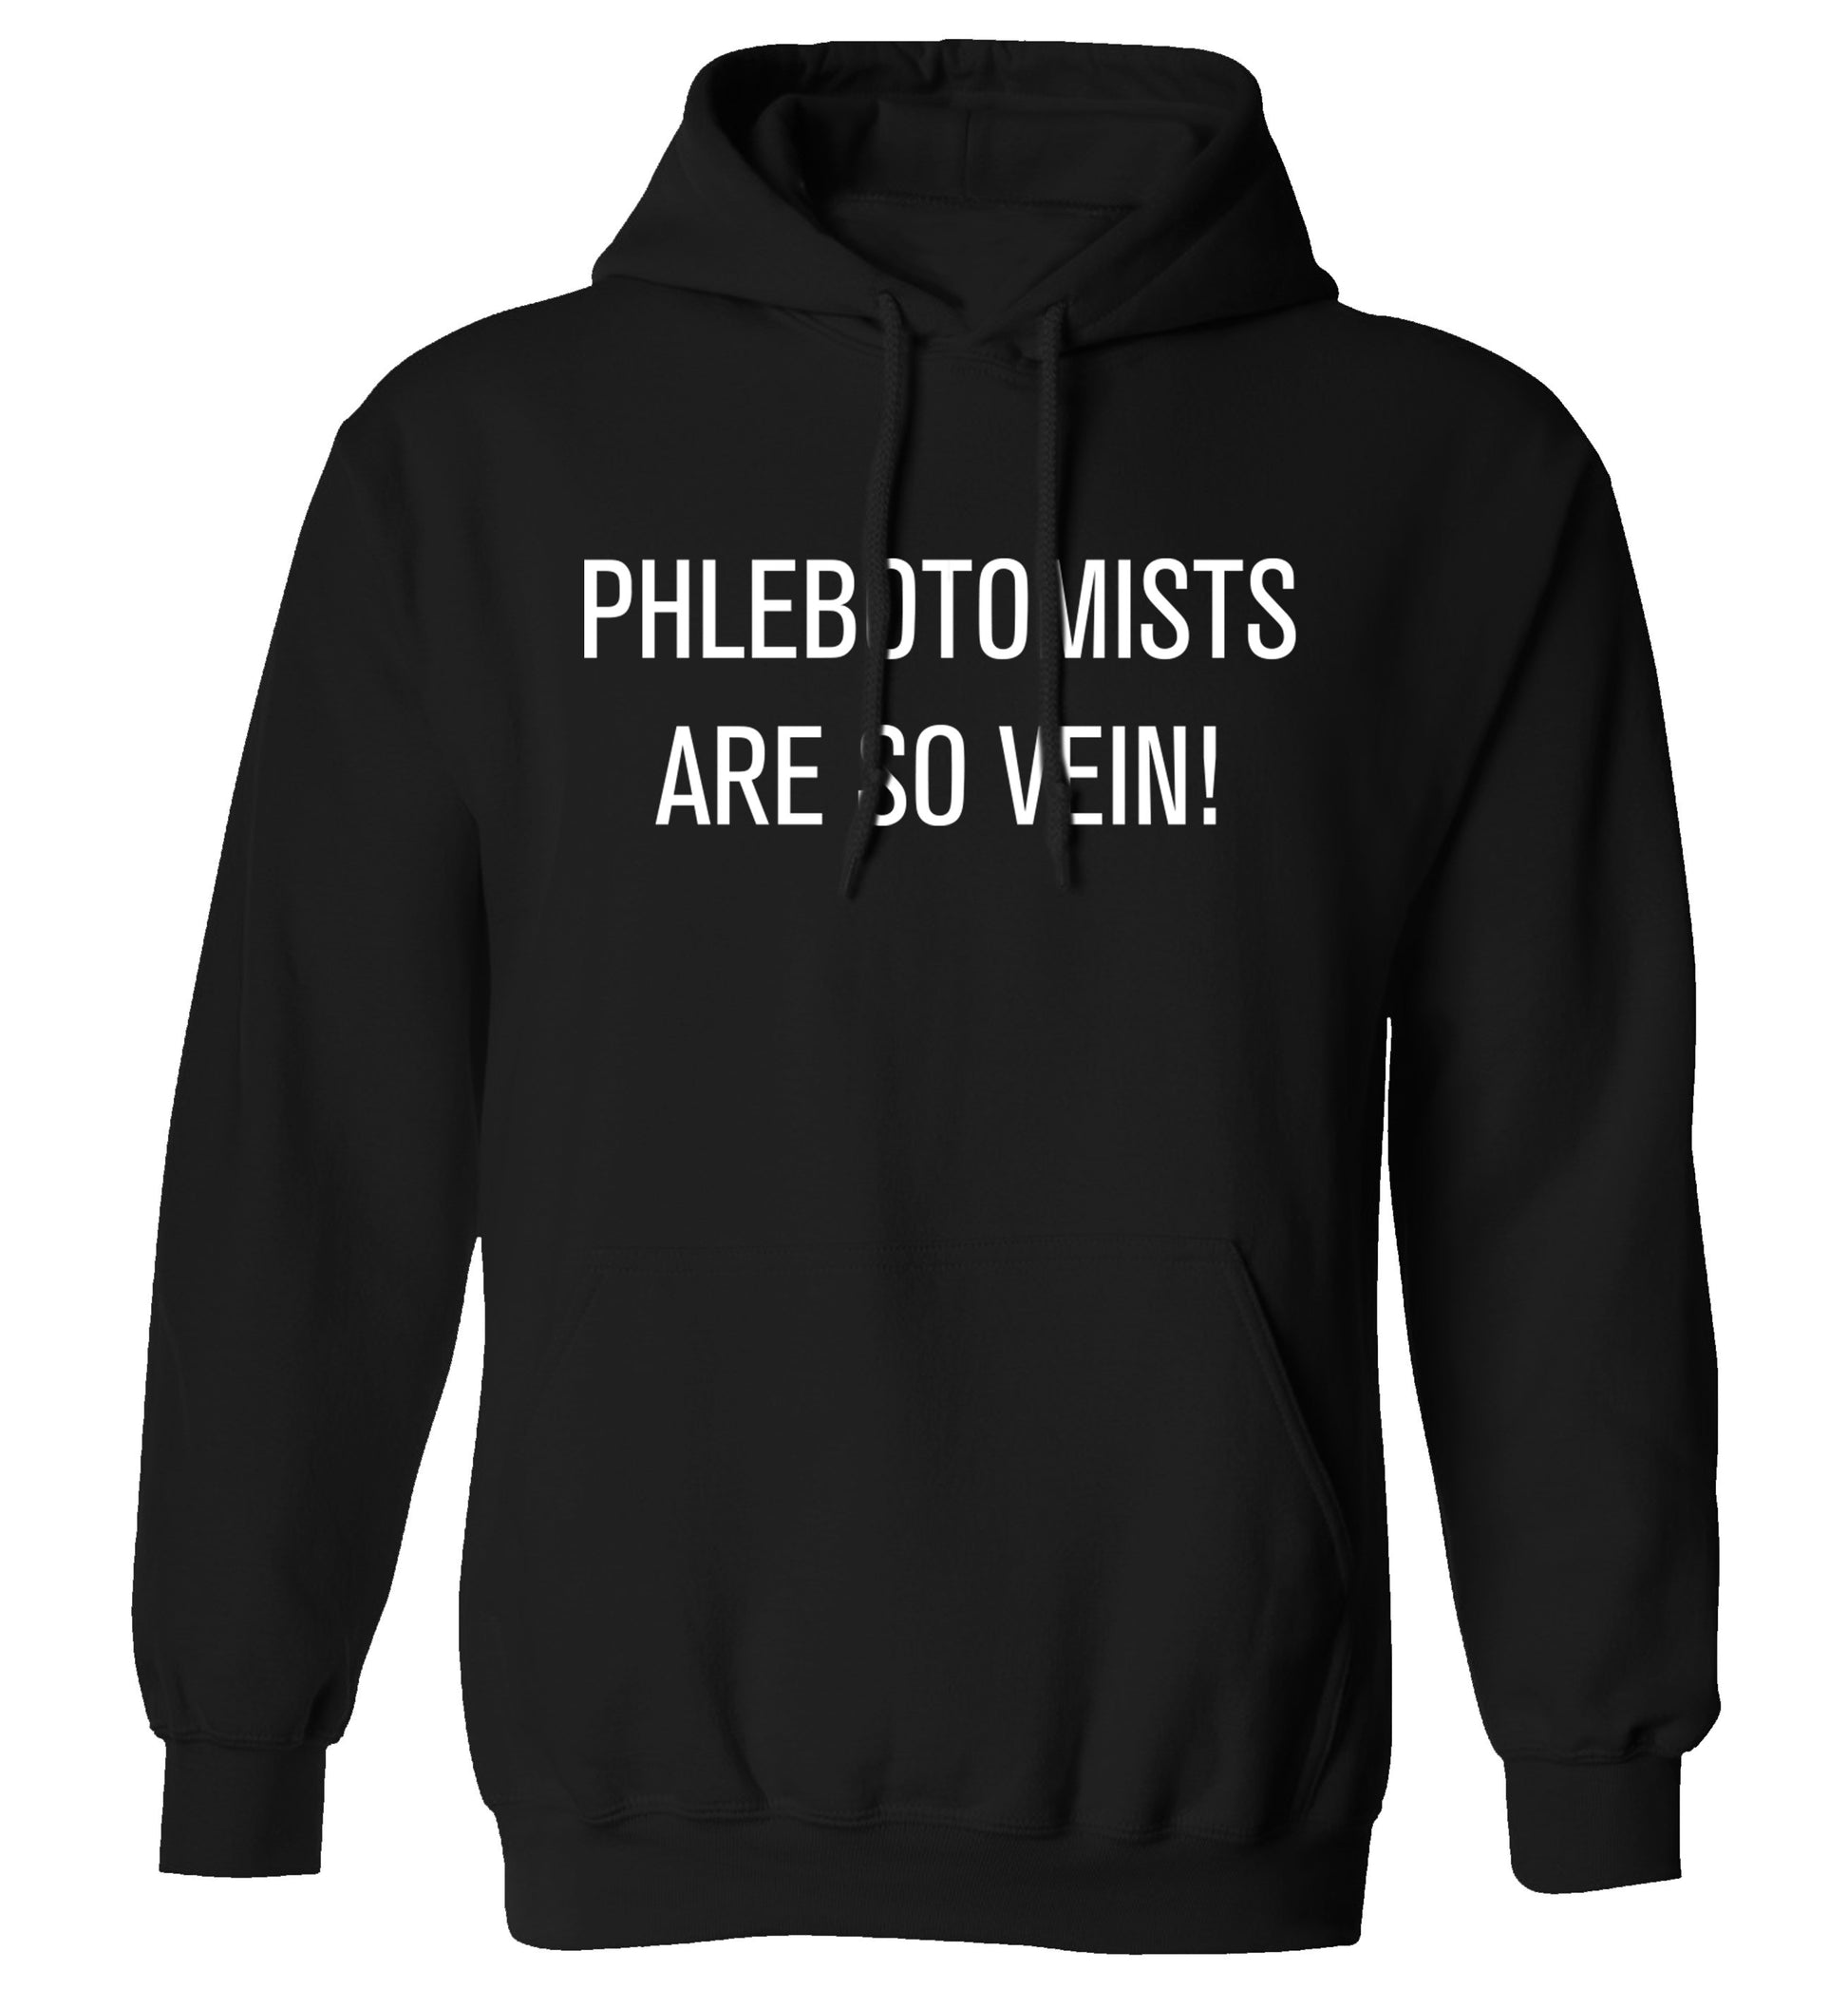 Phlebotomists are so vein! adults unisex black hoodie 2XL